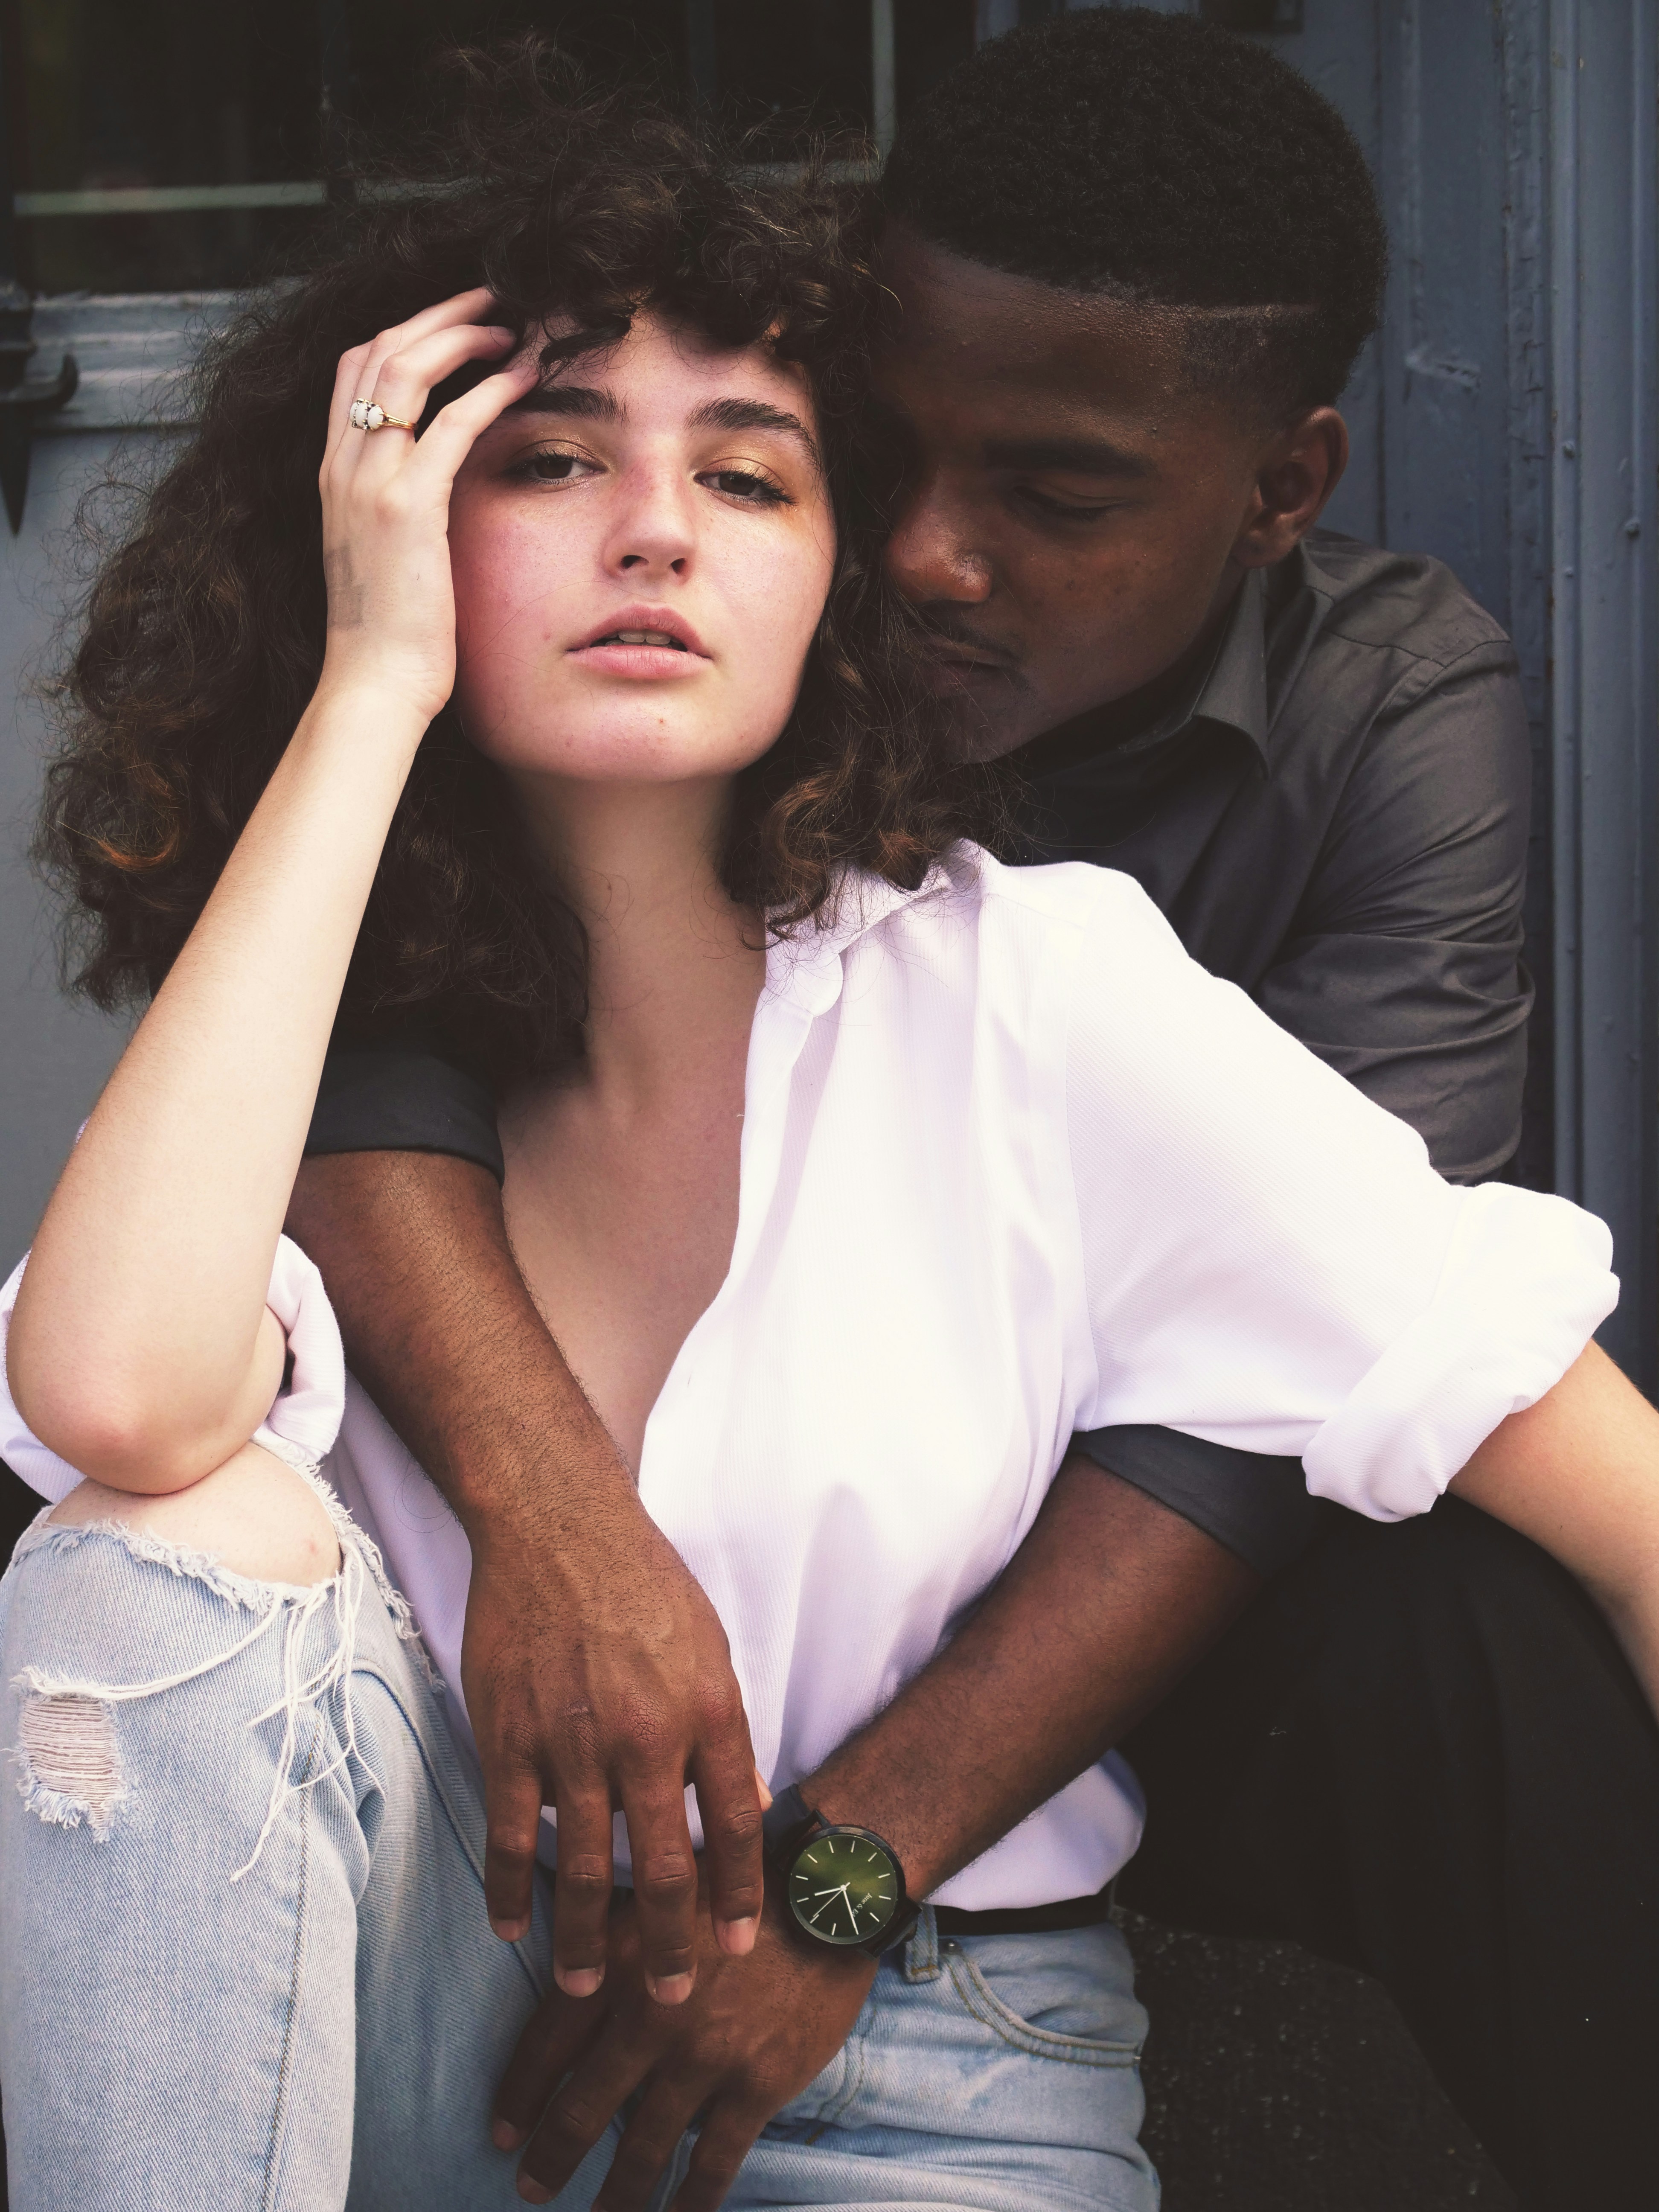 500+ Interracial Couple Pictures HD Download Free Images on Unsplash